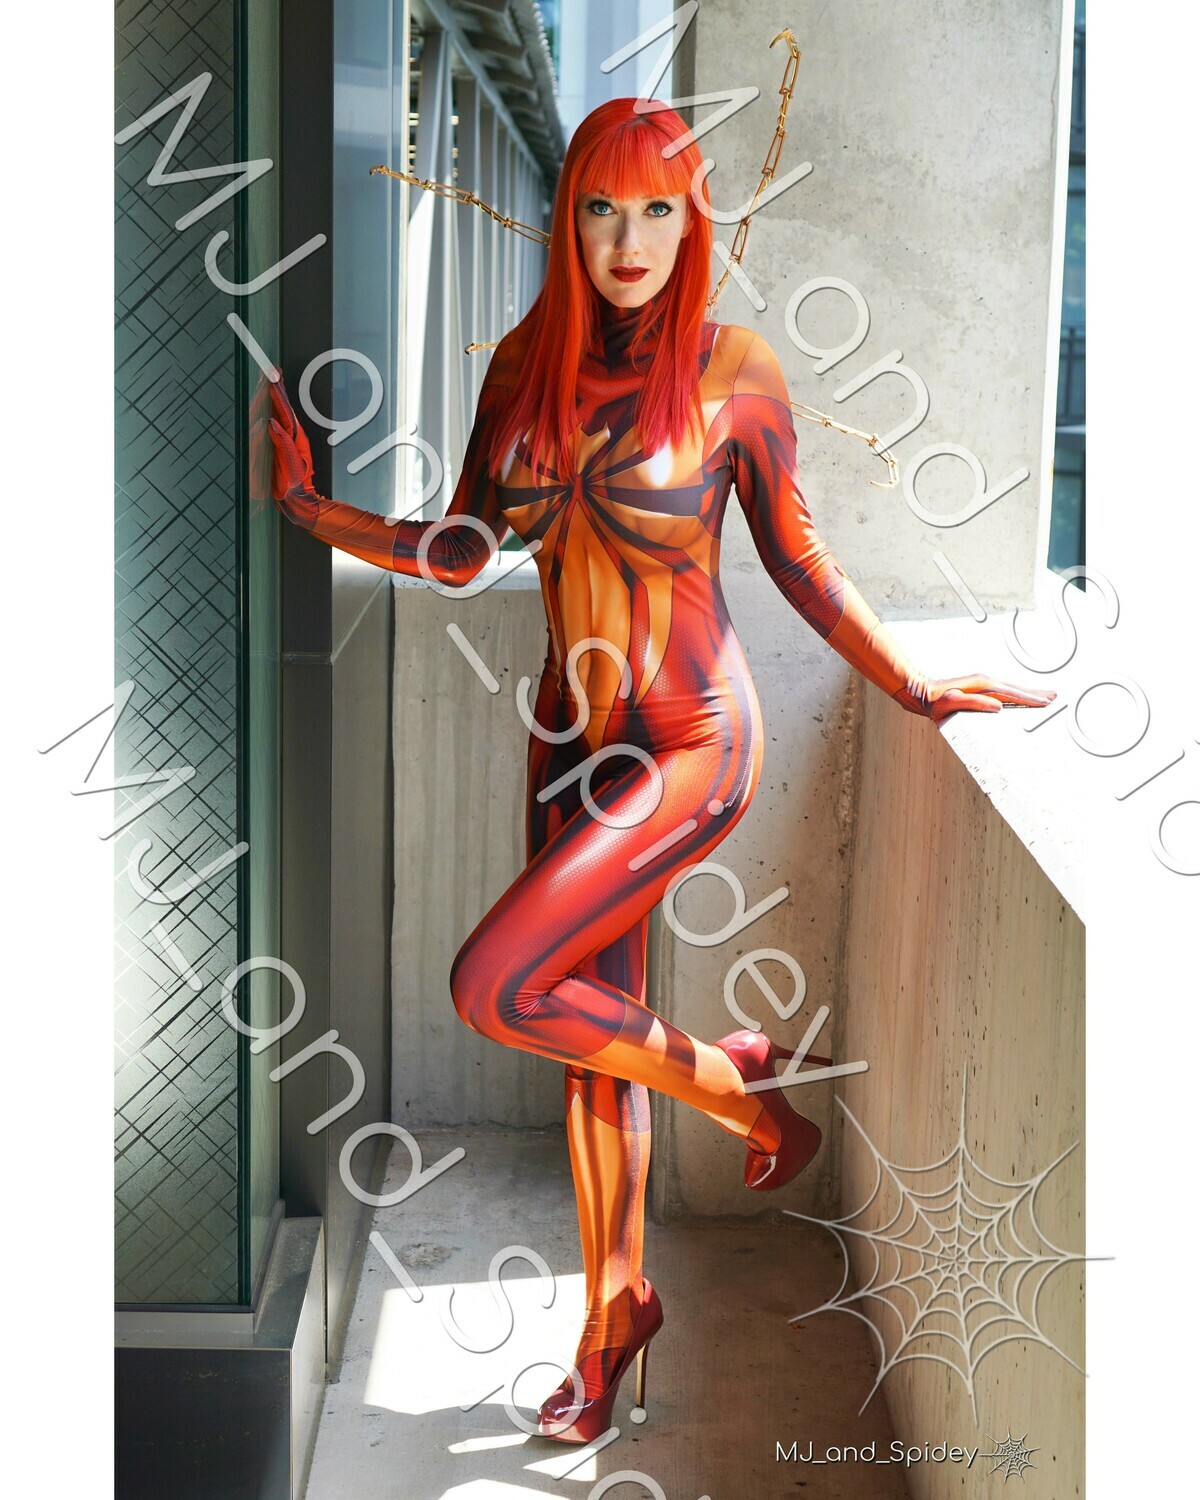 Marvel - Spider-Man - Mary Jane Watson - Iron Spider No. 1 - Digital Cosplay Image (@MJ_and_Spidey, MJ and Spidey, Comics)